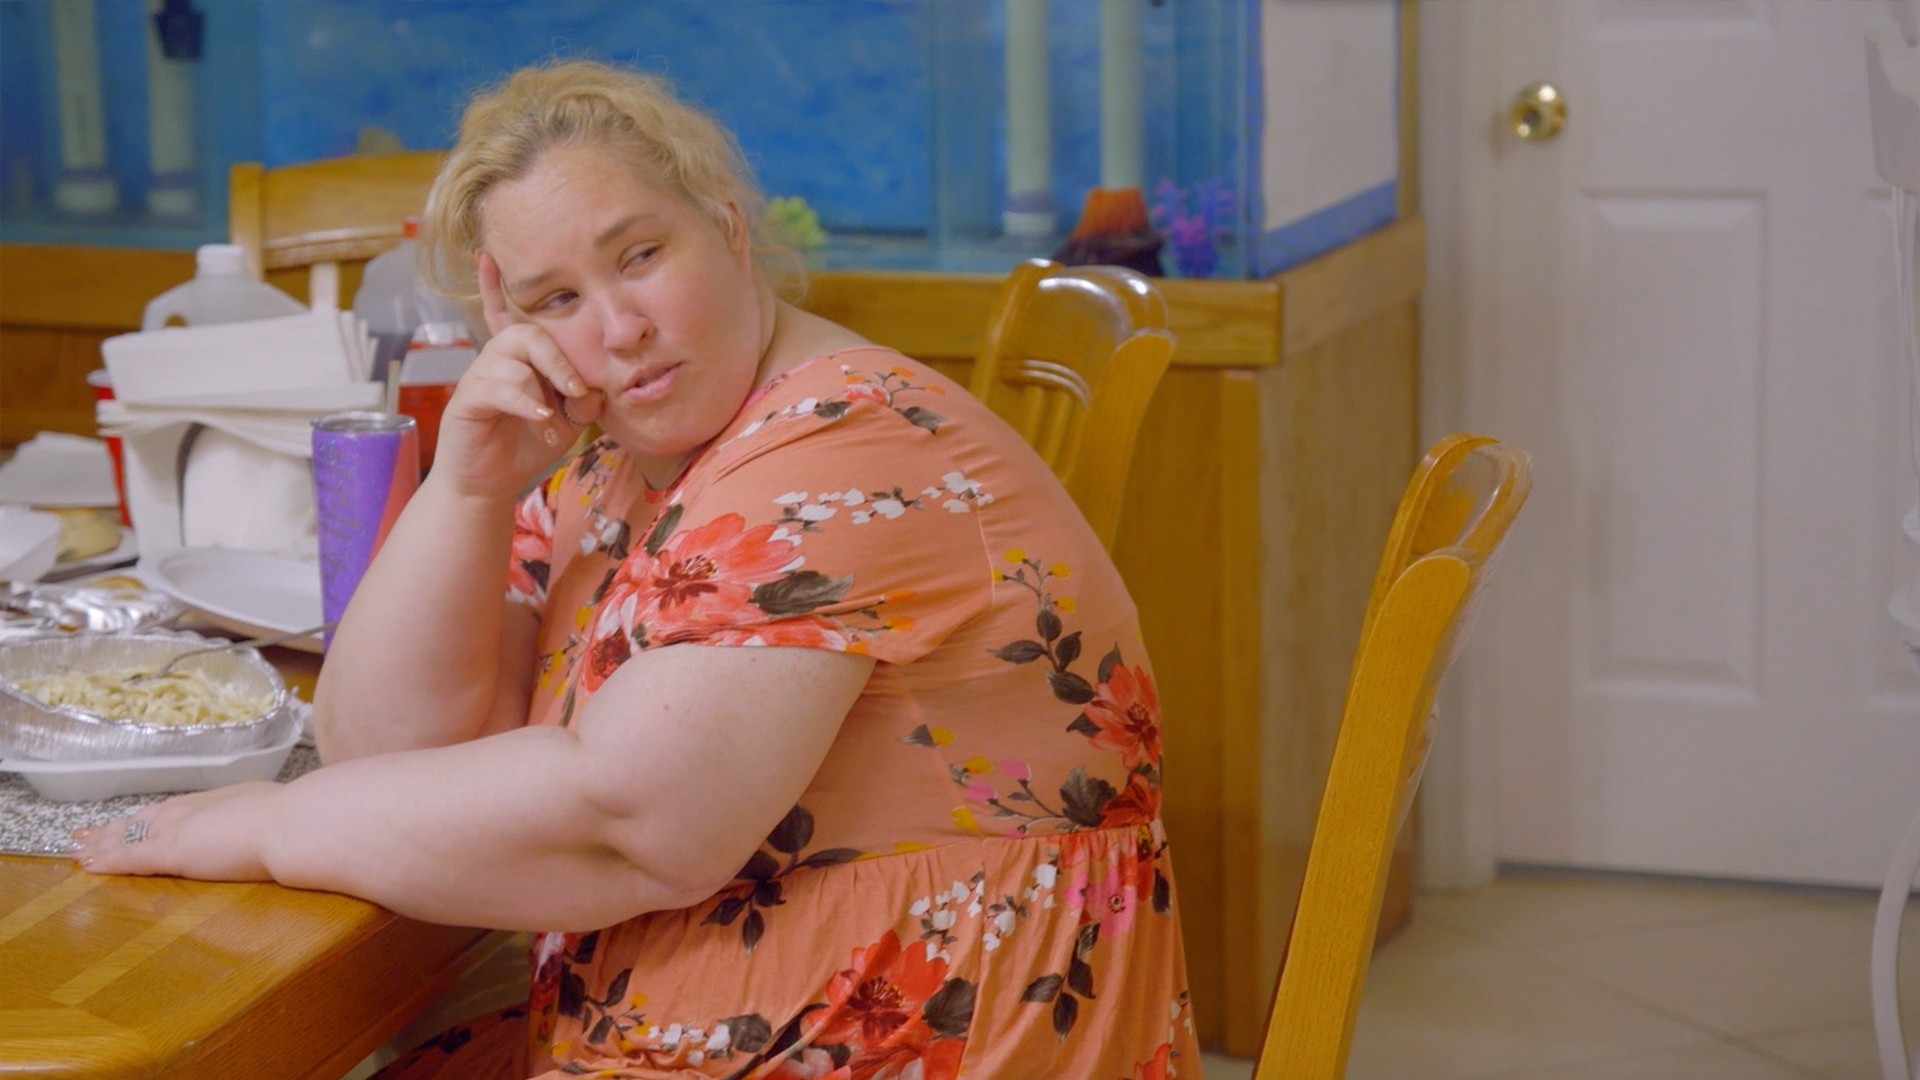 Watch Sneak Peek: June Gets Caught Lying! | Mama June: From Not to Hot Video Extras